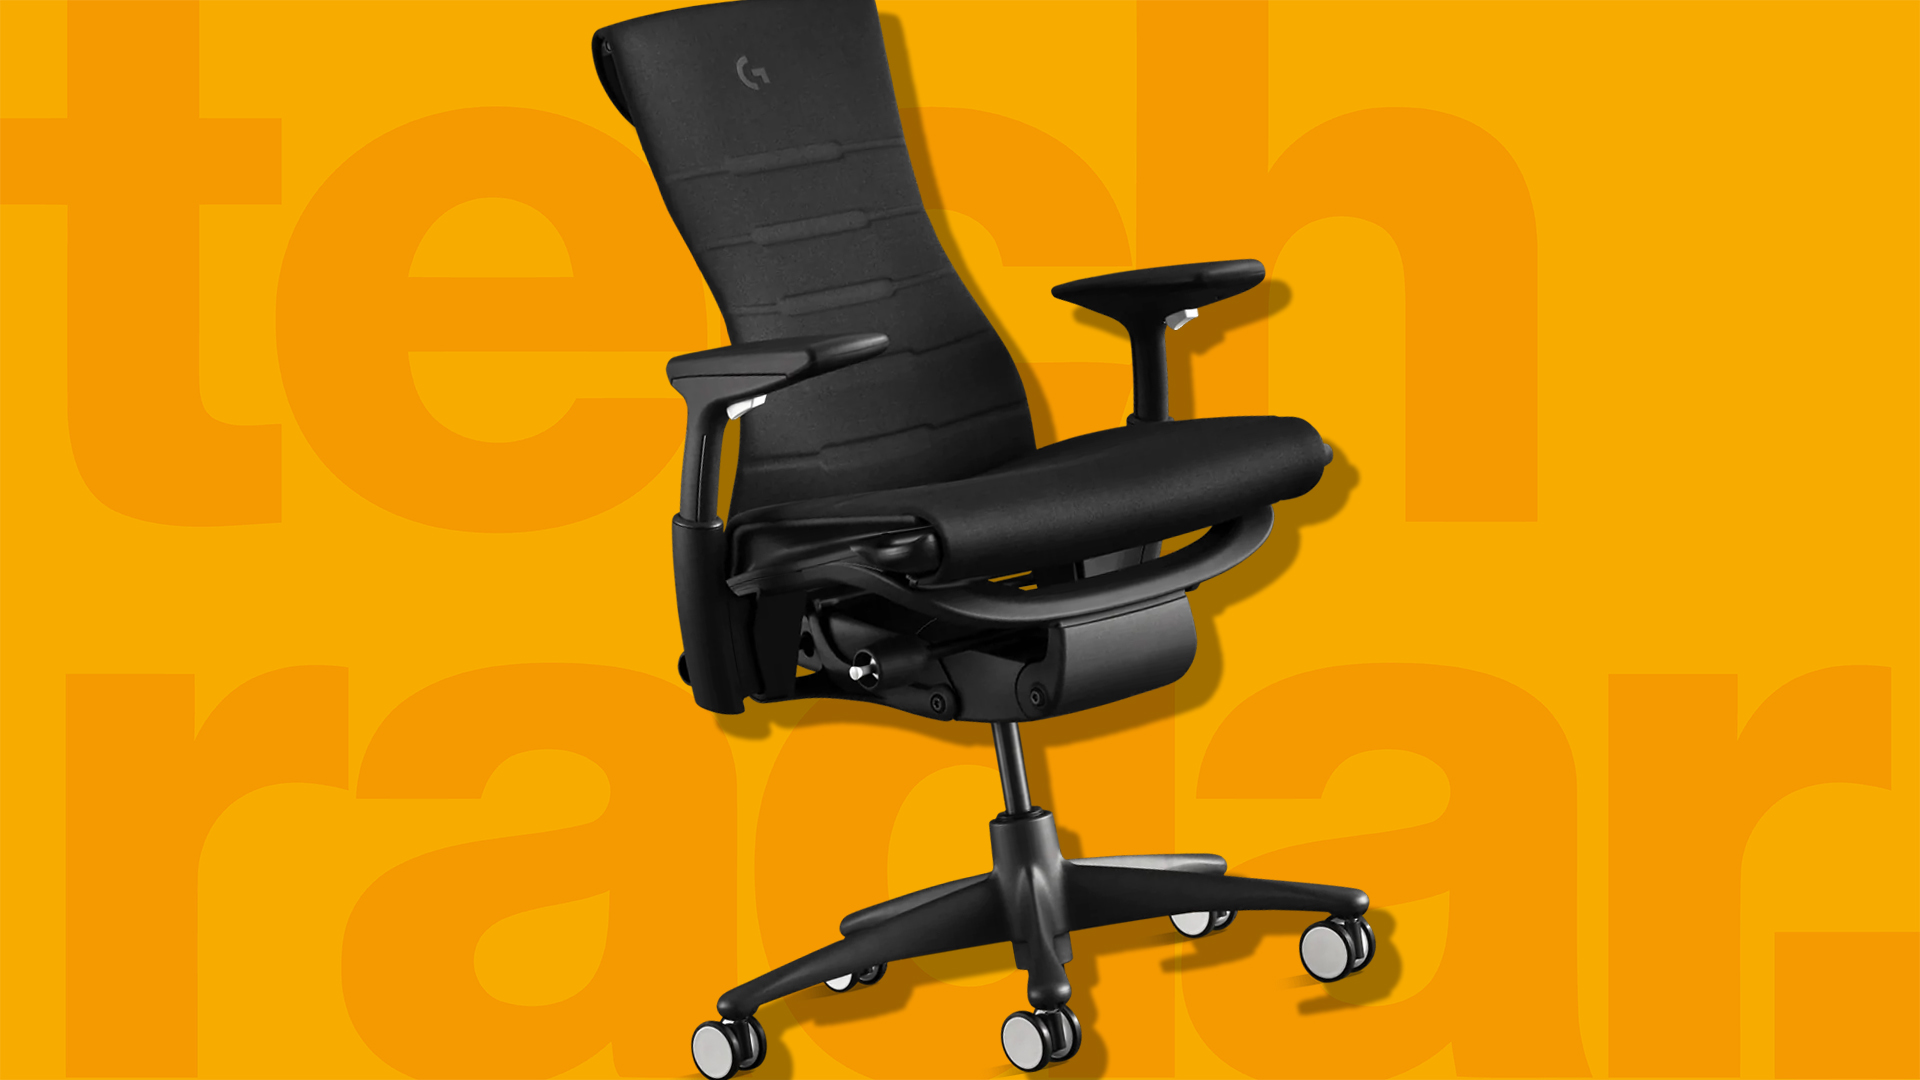 The most comfortable gaming chair